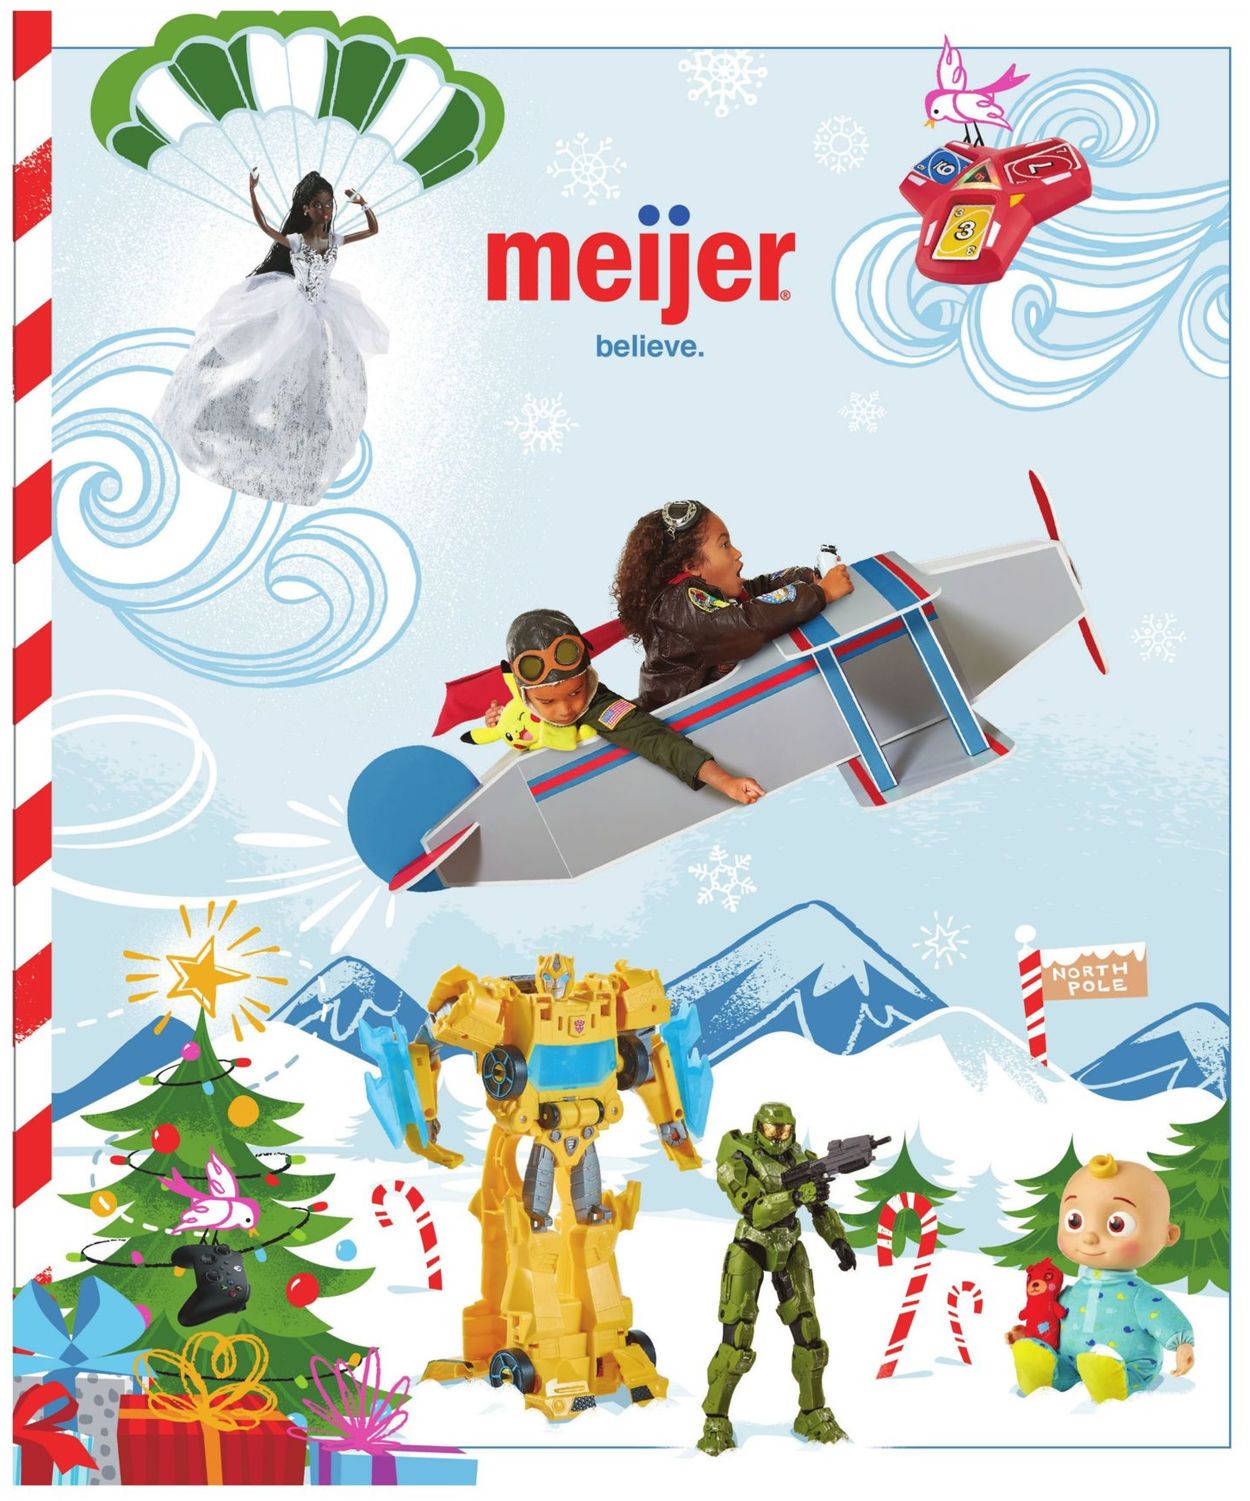 Meijer Ad from 10/31/2021